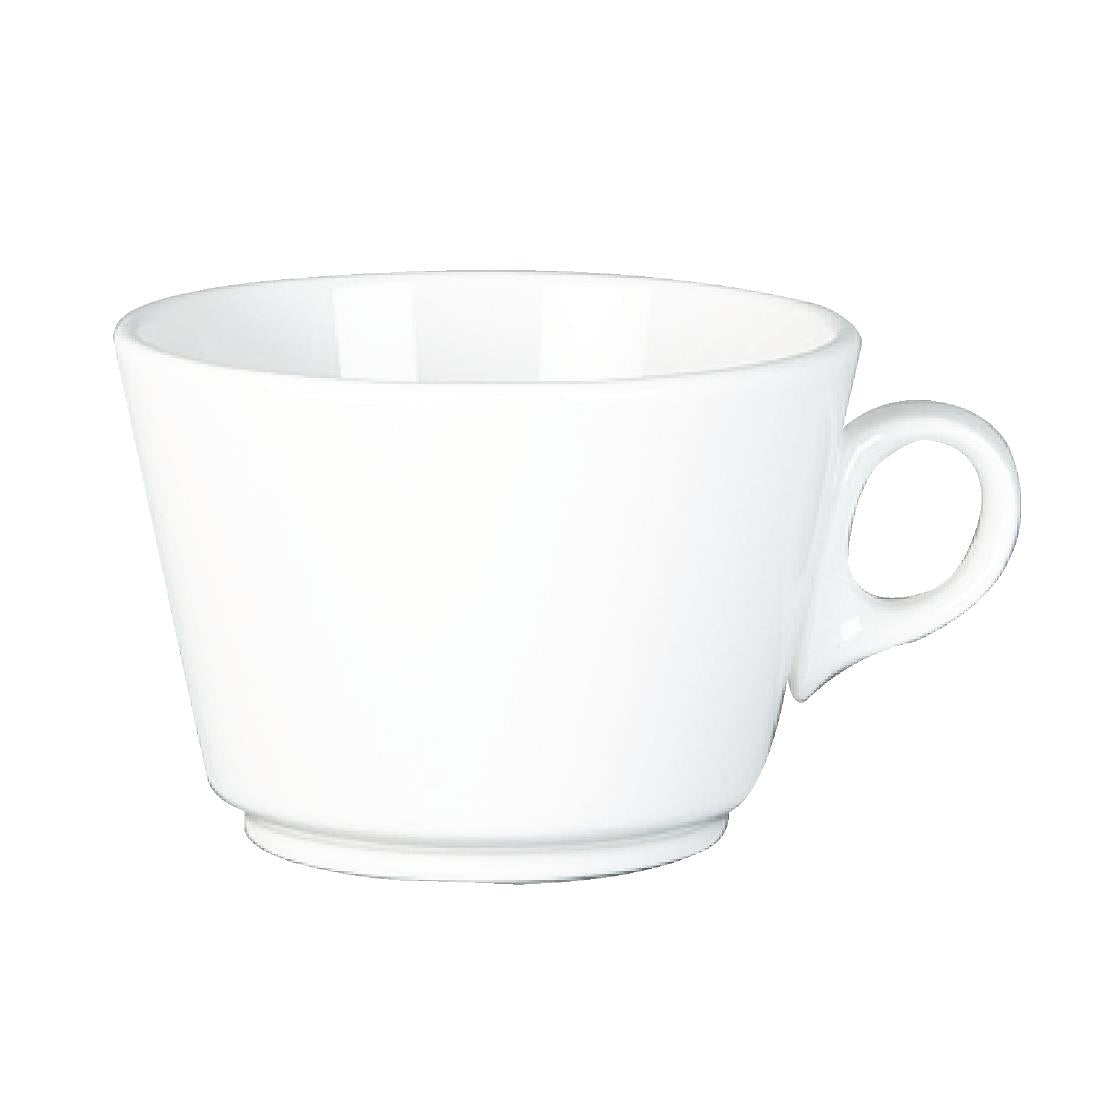 Steelite Simplicity White Grand Cafe Cups 75ml (Pack of 12)